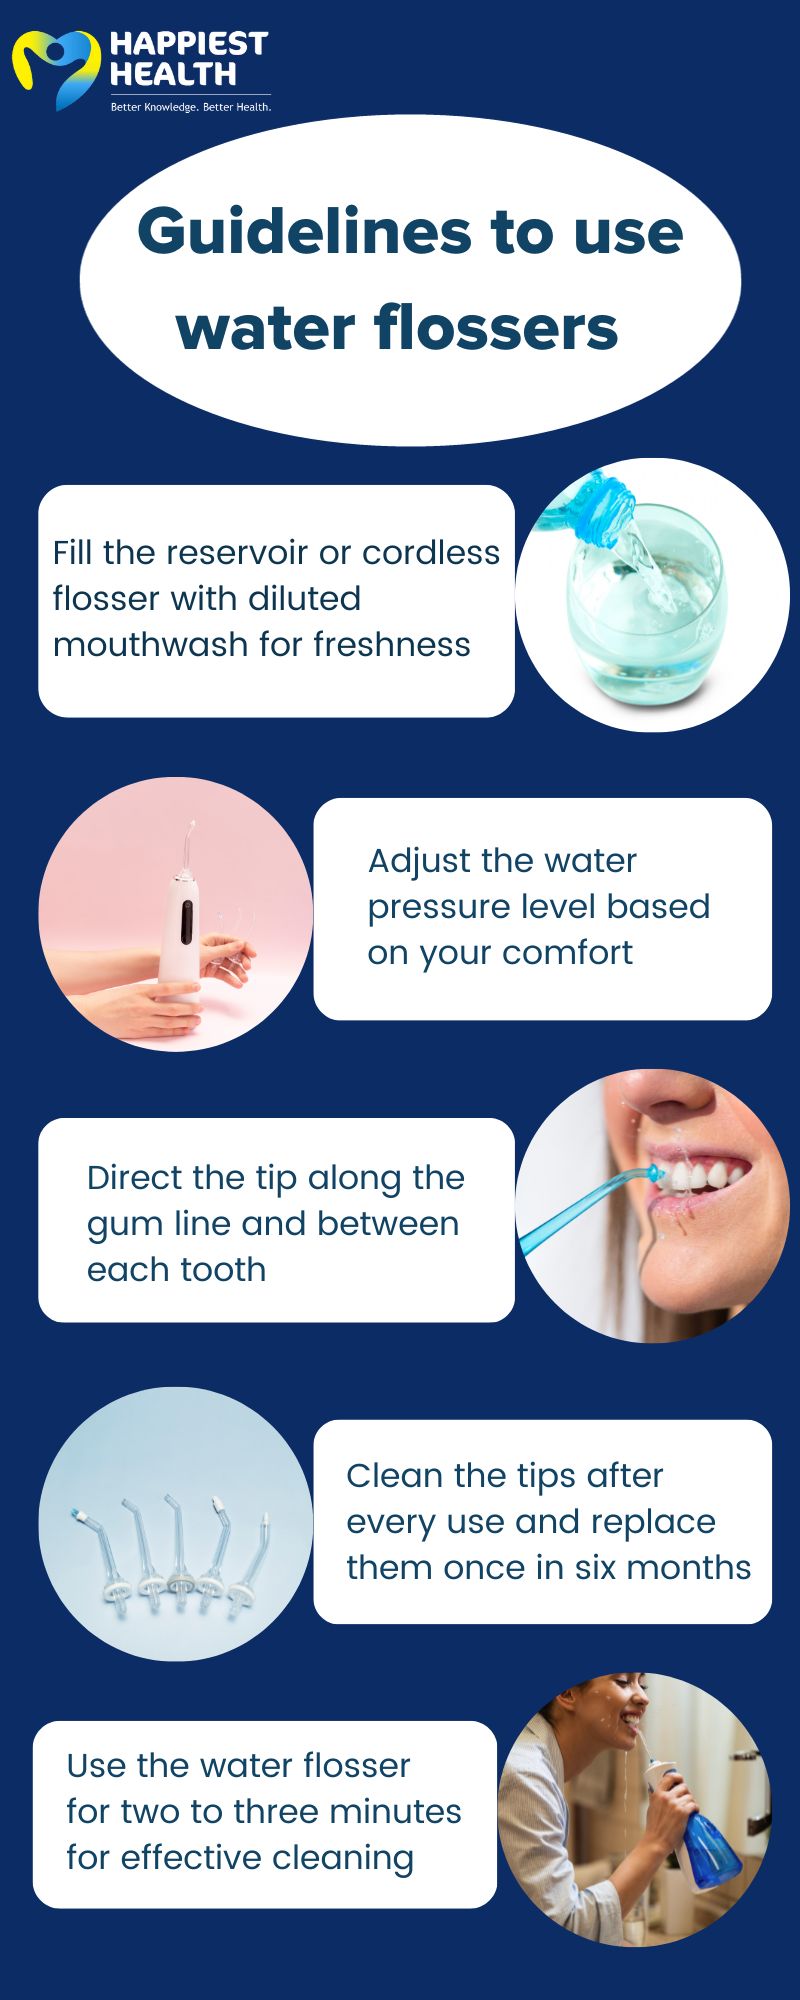 Guidelines to use water flossers  